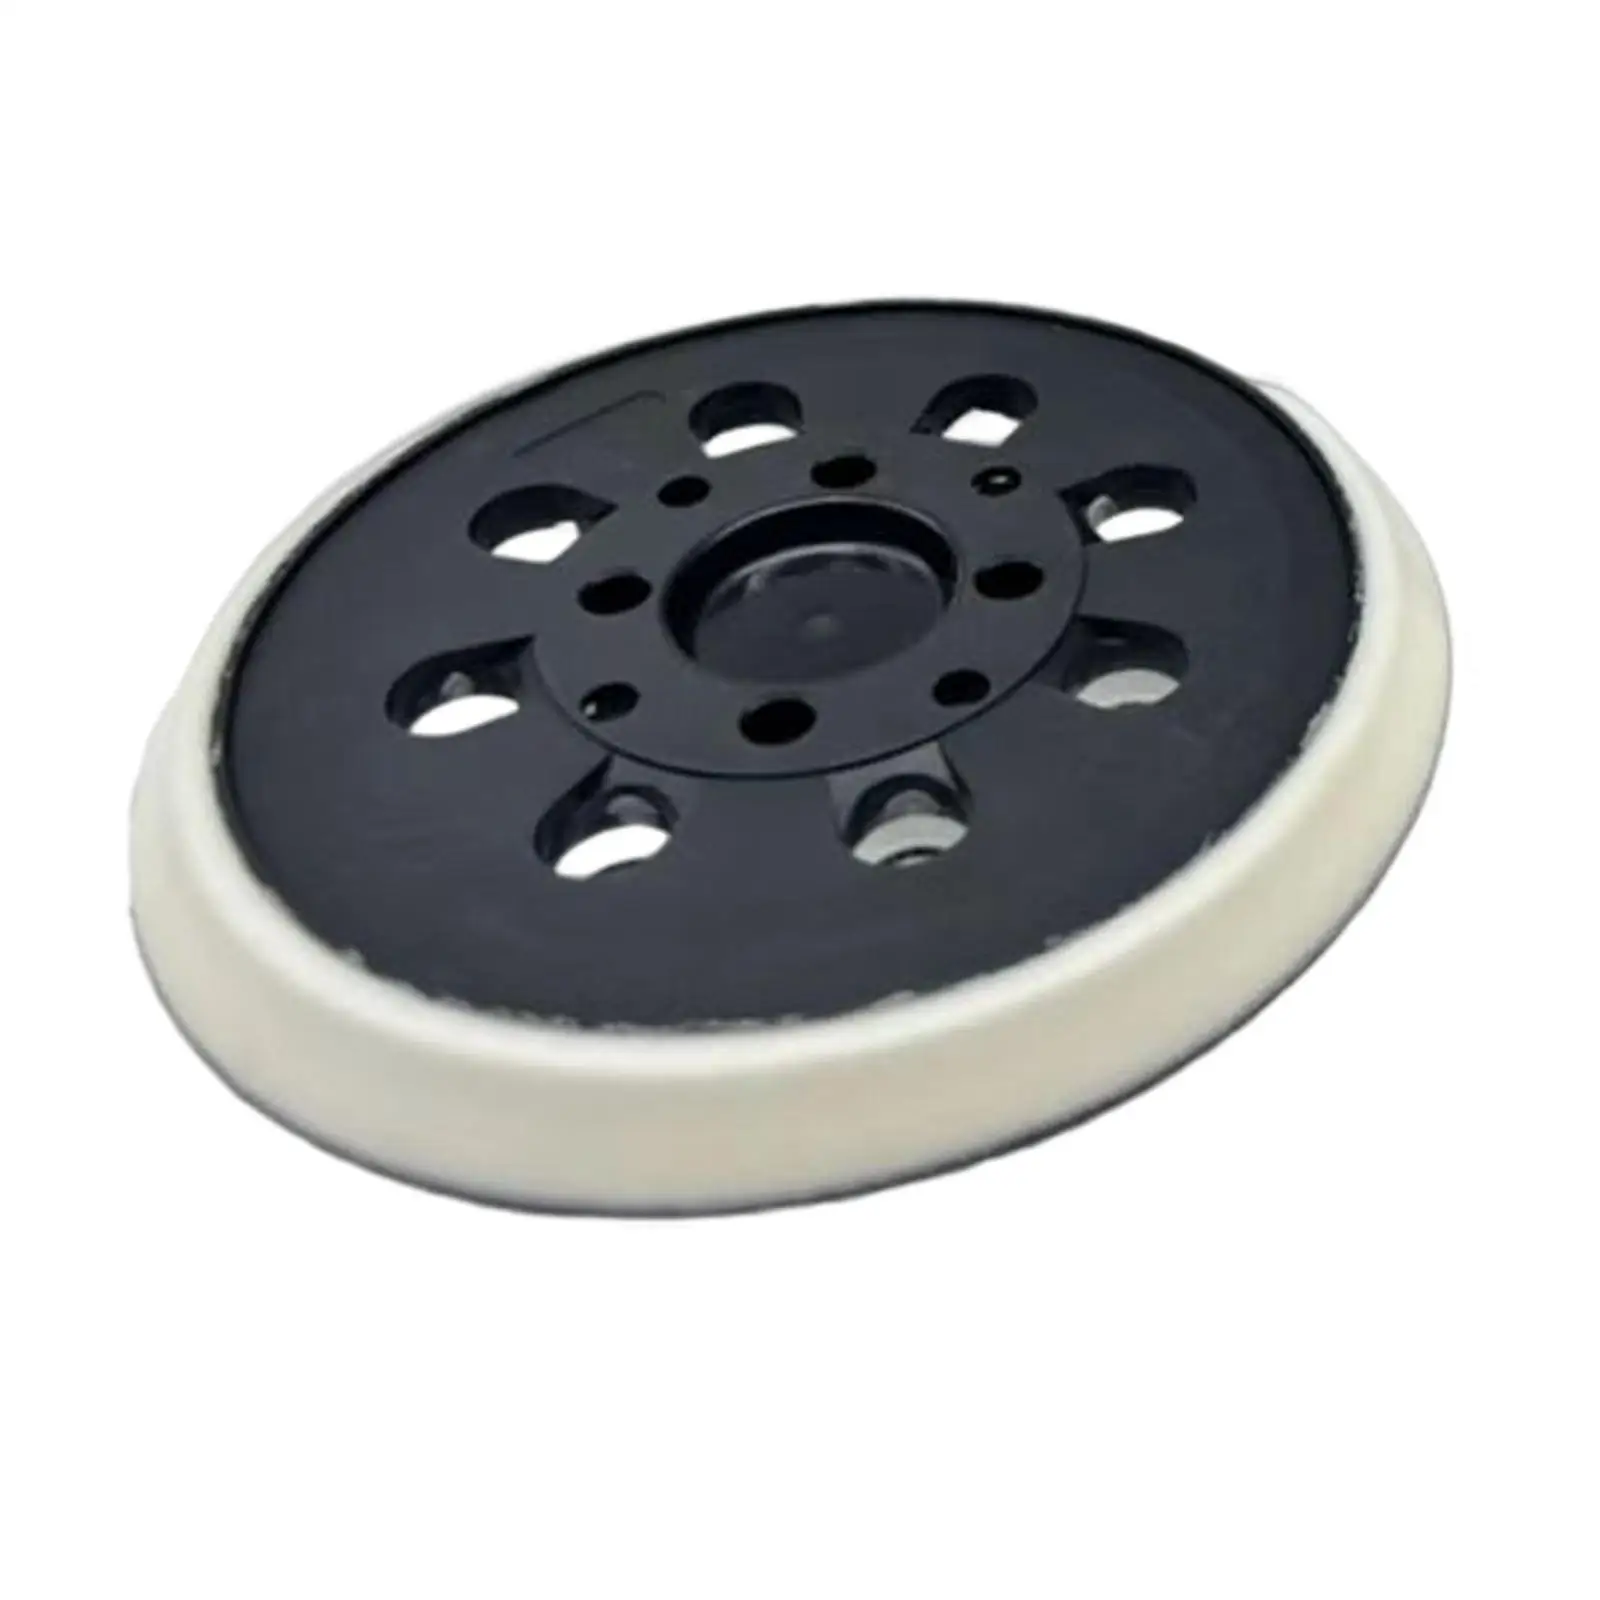 5inch Polishing Backing Pad Sander Polisher Tool hook Power Sander Accessories Sanding Plate for Rubber Wood Grinding Stone